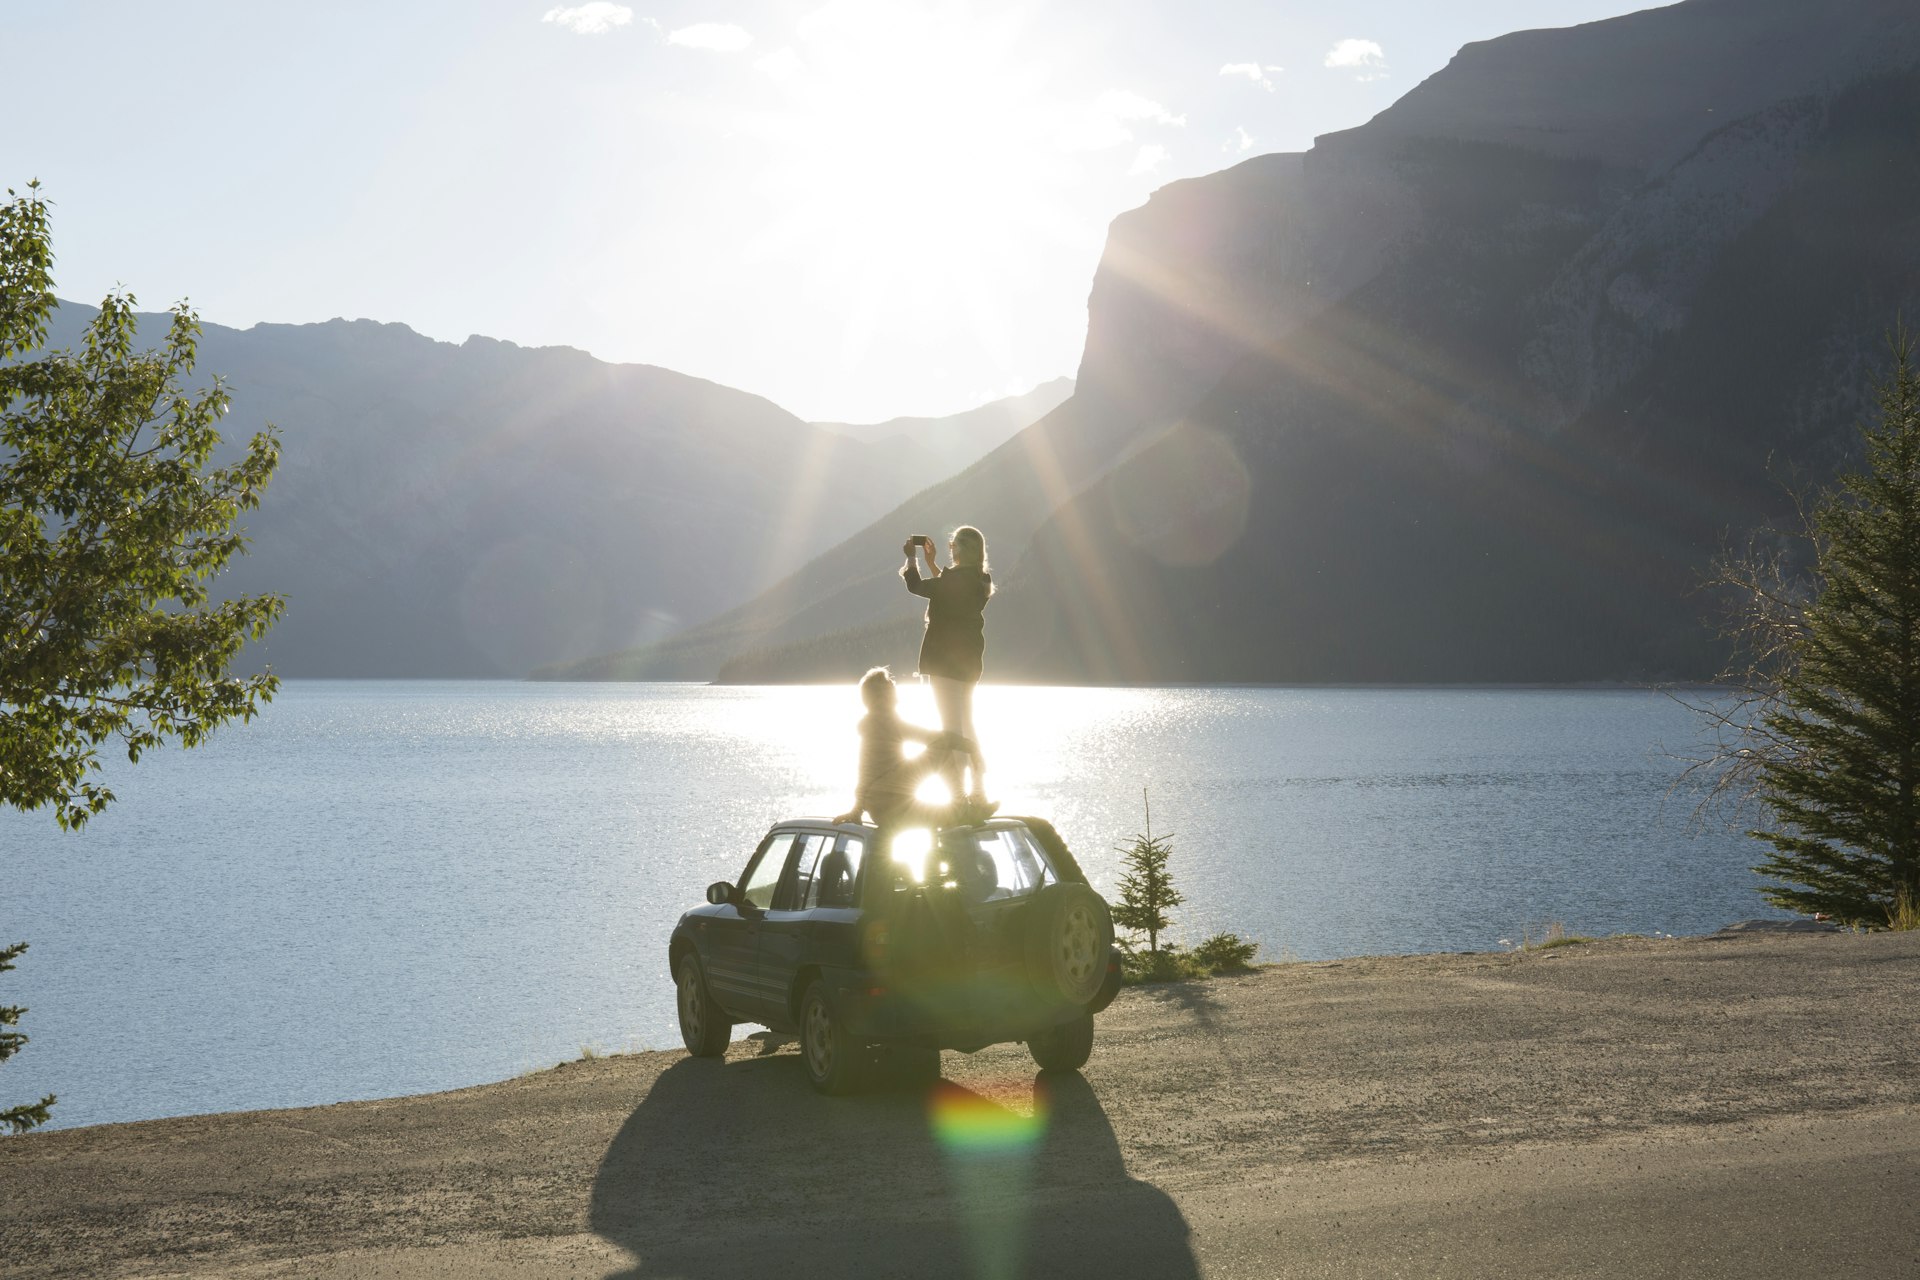 Woman takes photo from car roof while man relaxes by a lake, Banff National Park, Alberta, Canada